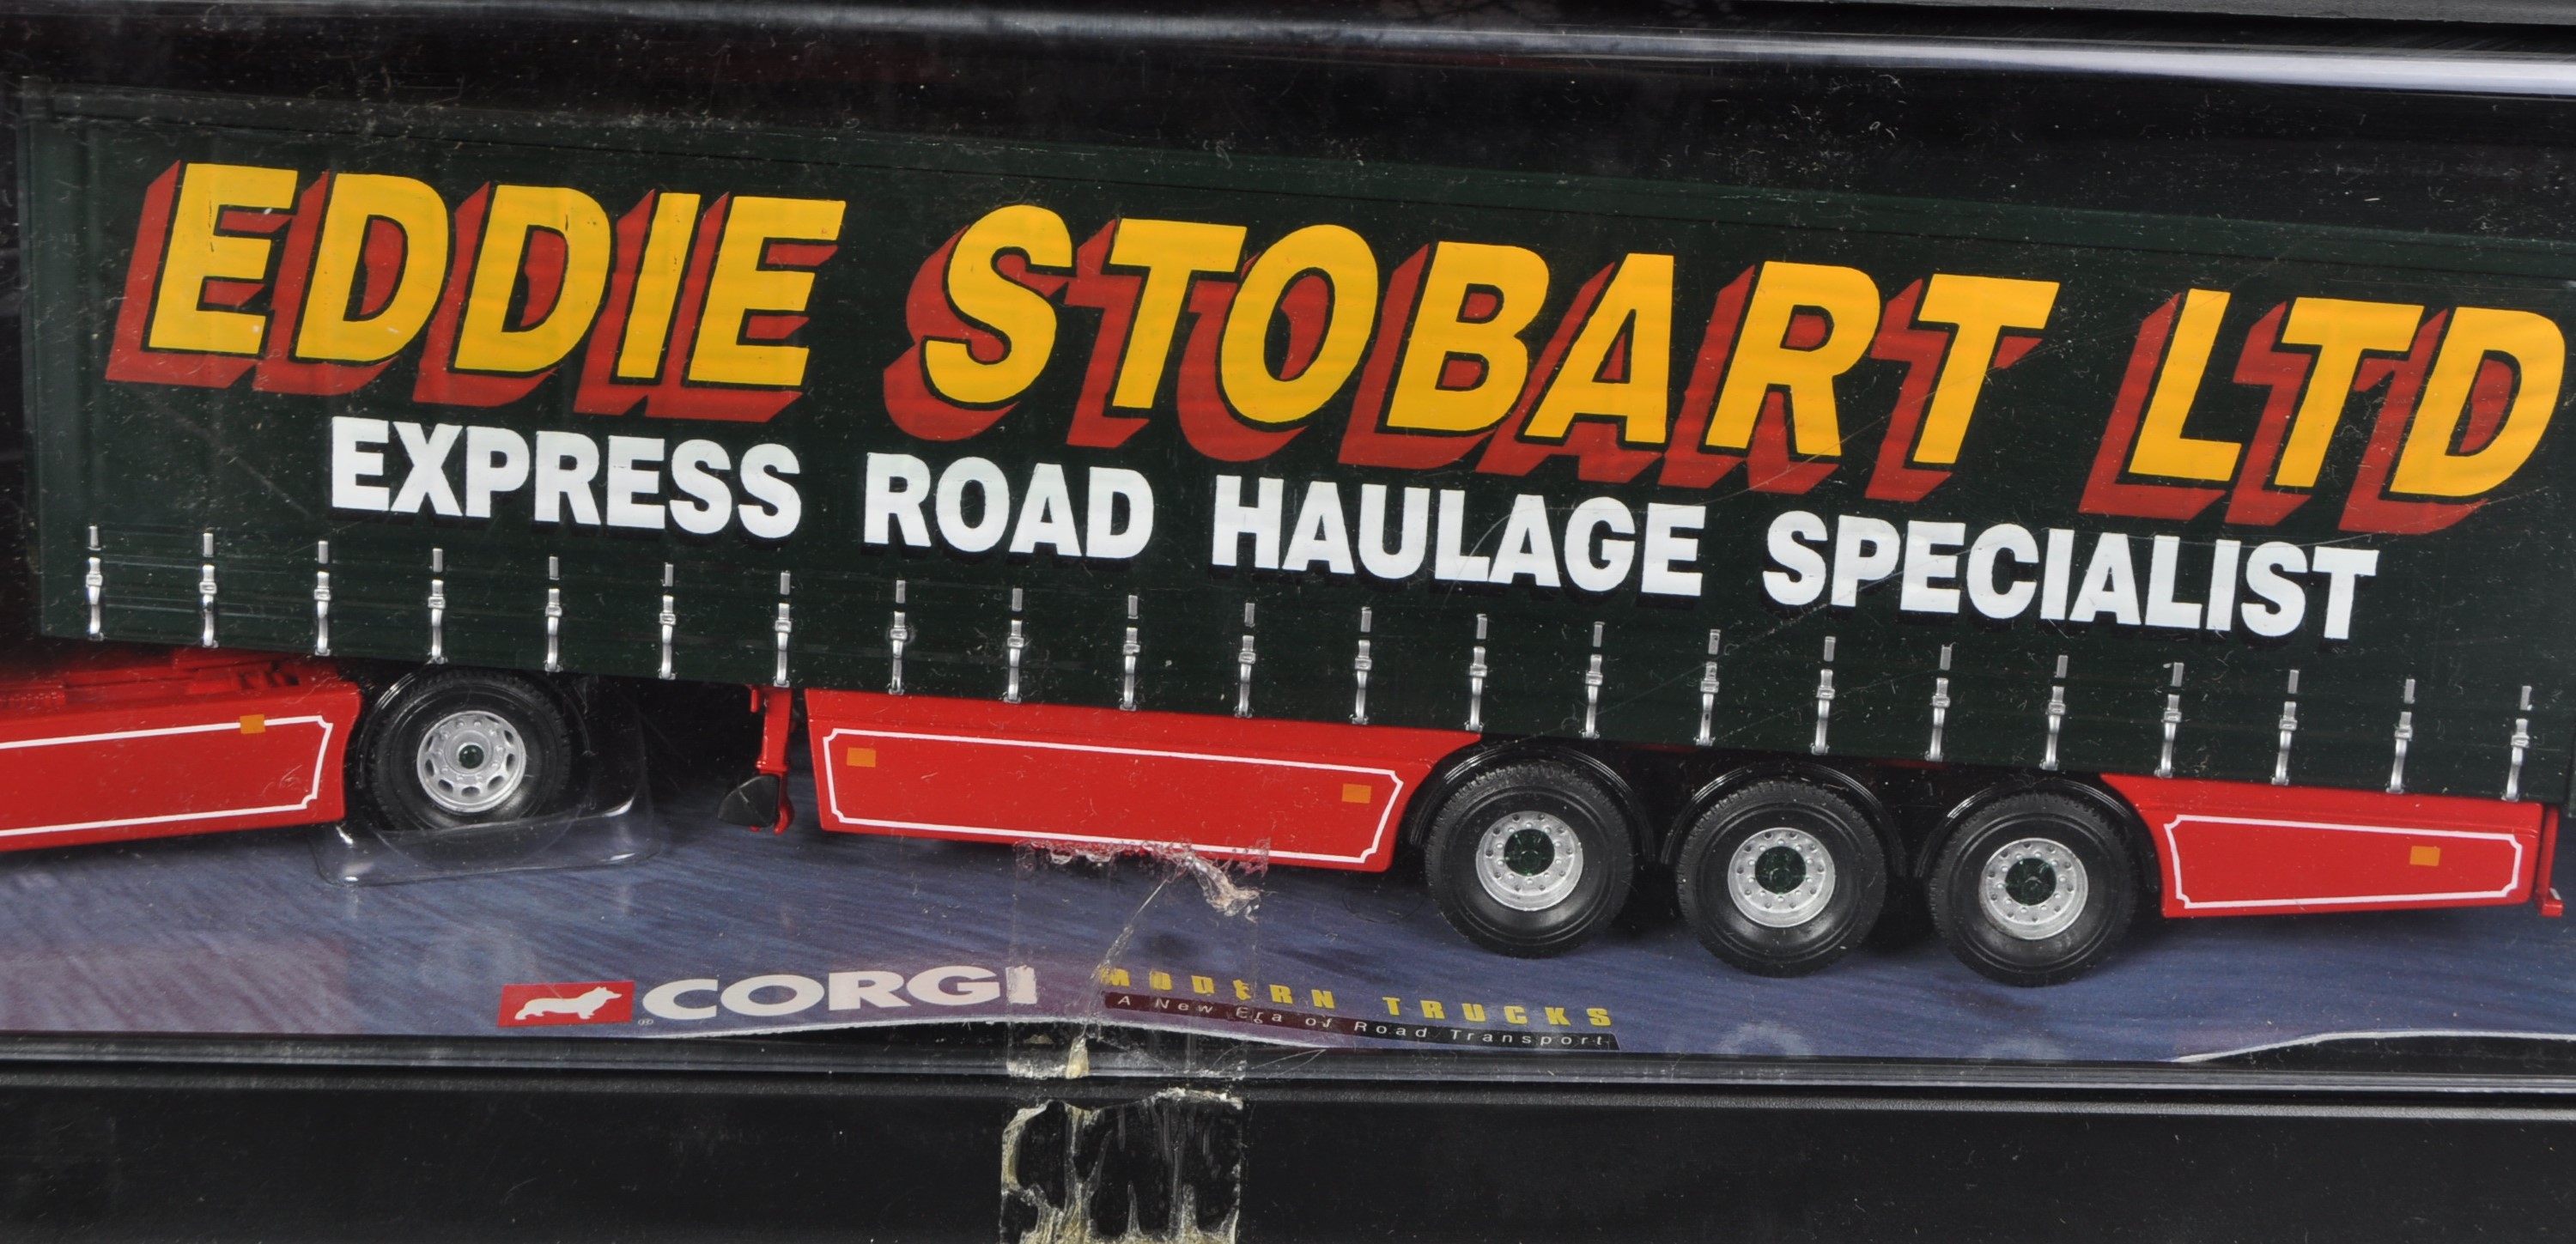 COLLECTION OF ASSORTED CORGI EDDIE STOBART DIECAST MODELS - Image 6 of 7